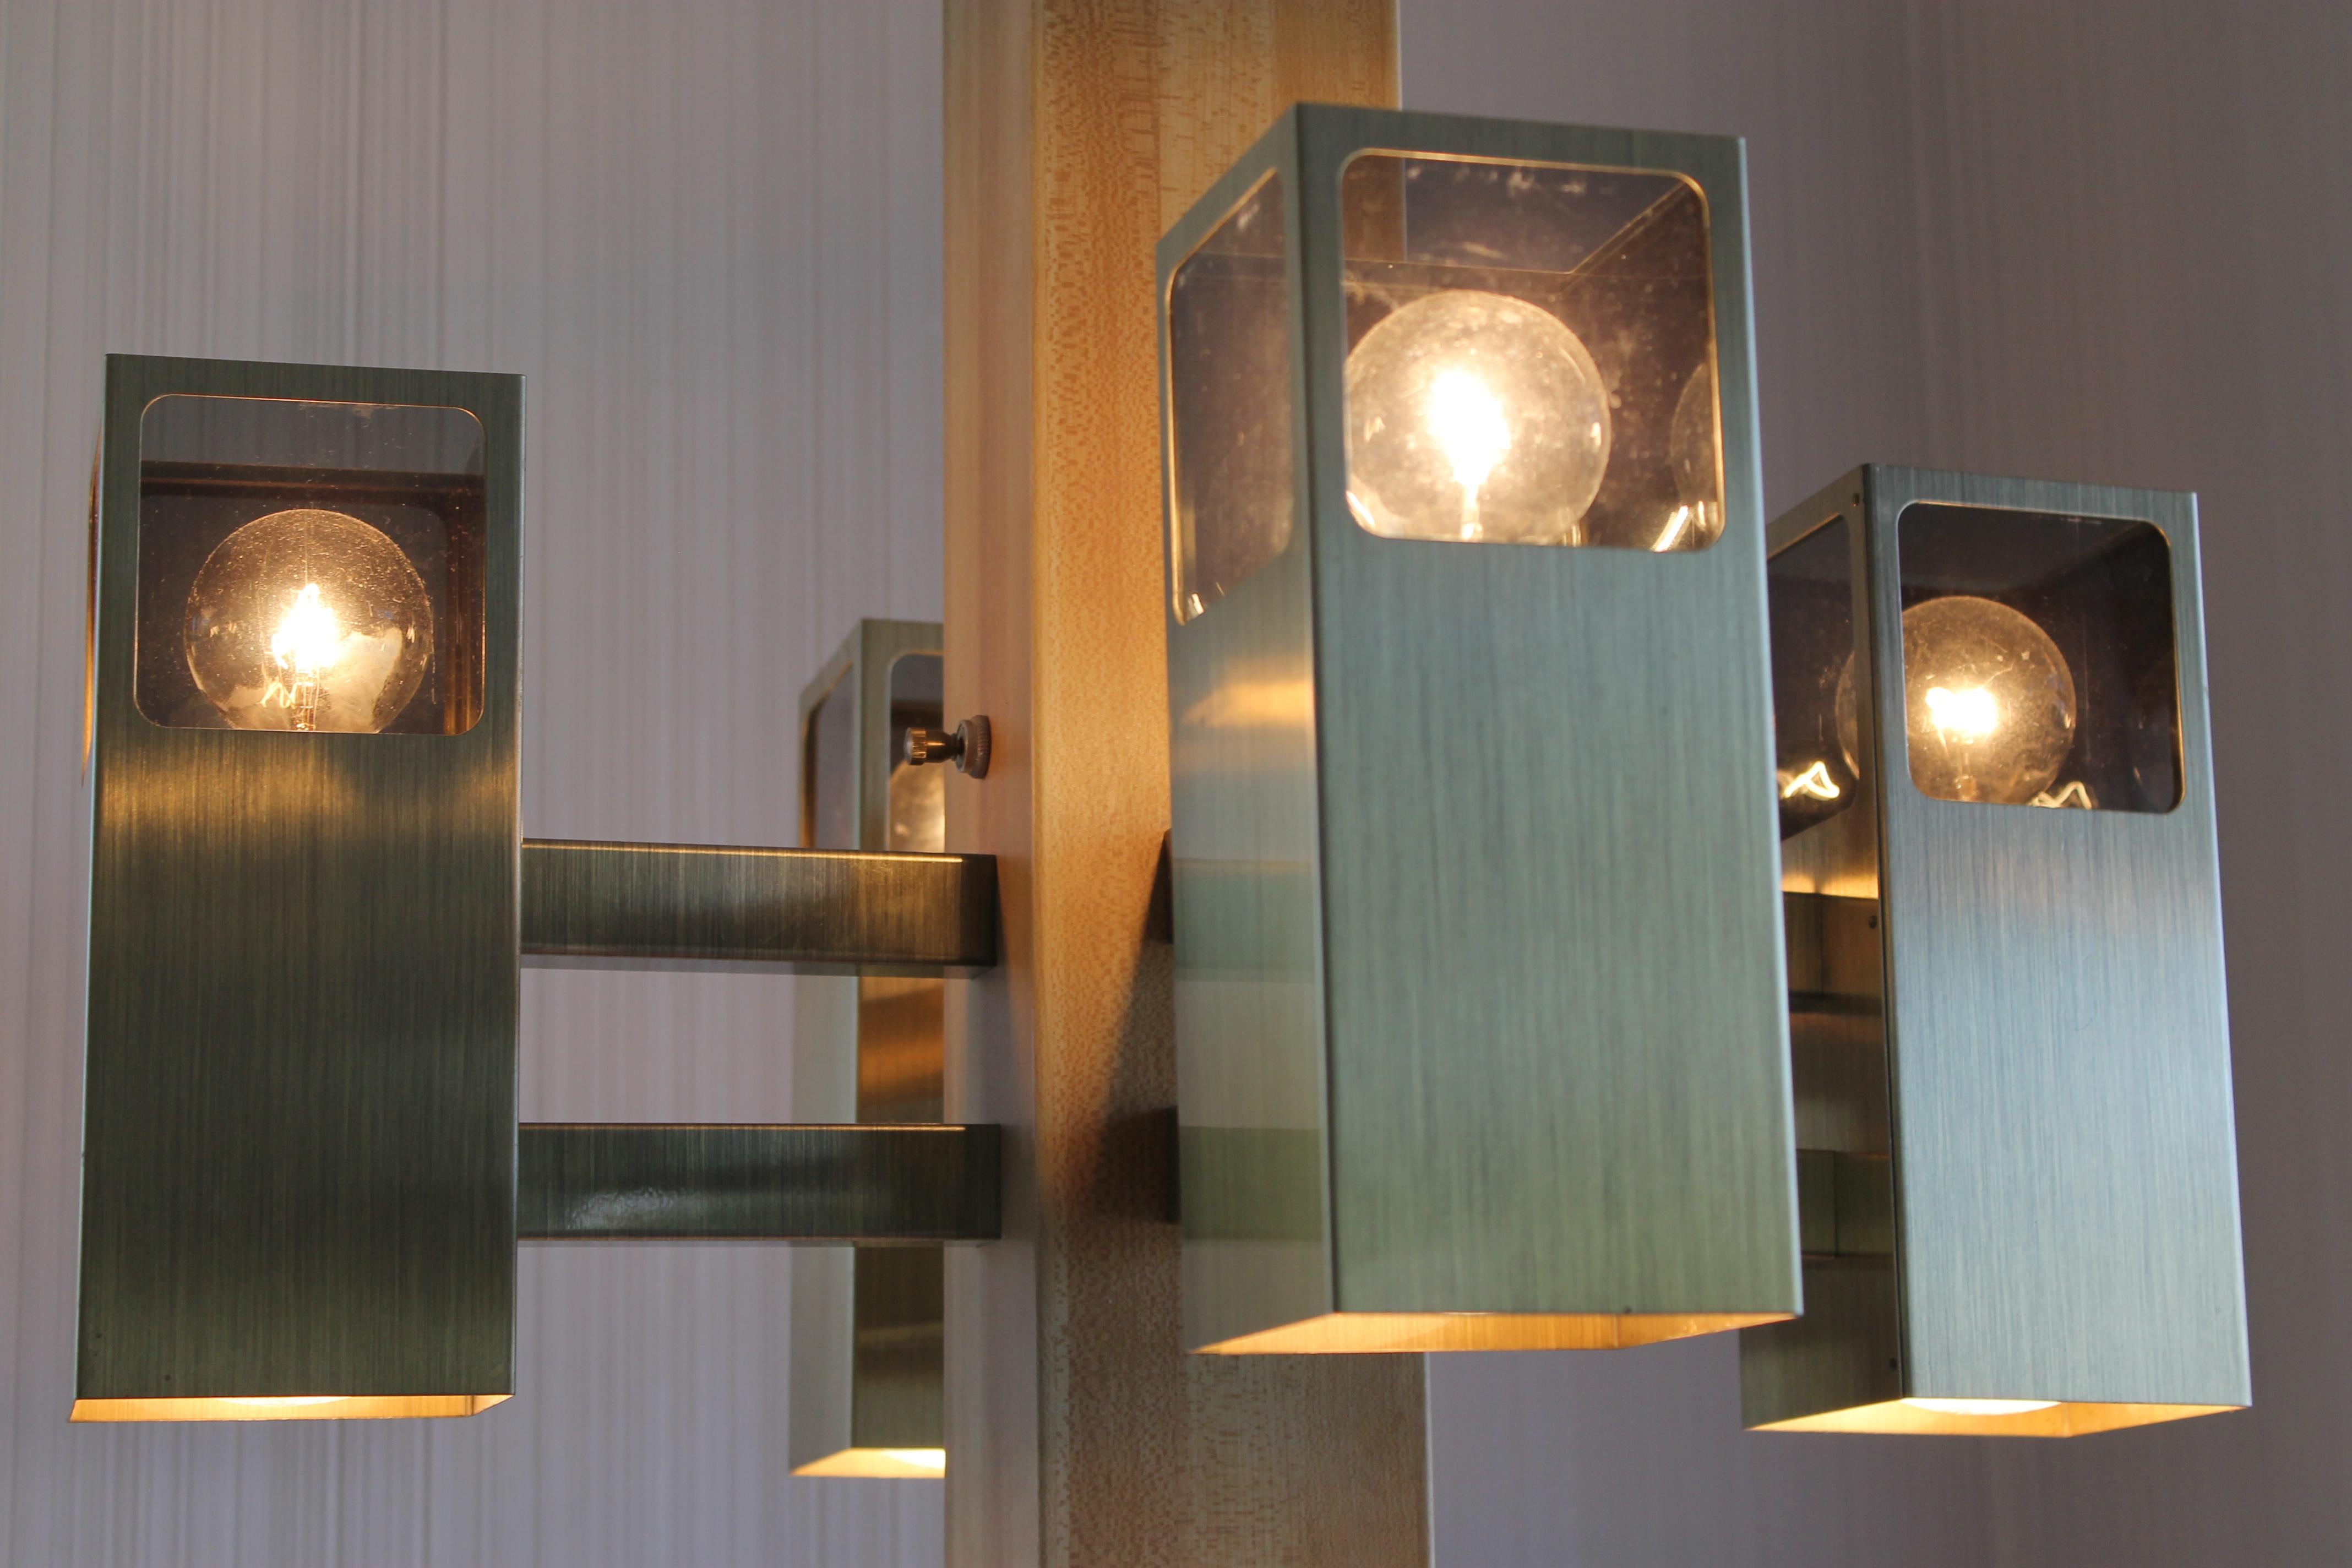 A circa 1960s modern chandelier with four square canisters radiating from a central square hub. Smoked grey plexiglass windows soften the light behind. The four canisters and the hub all have a spot aiming down from within. The three-way switch